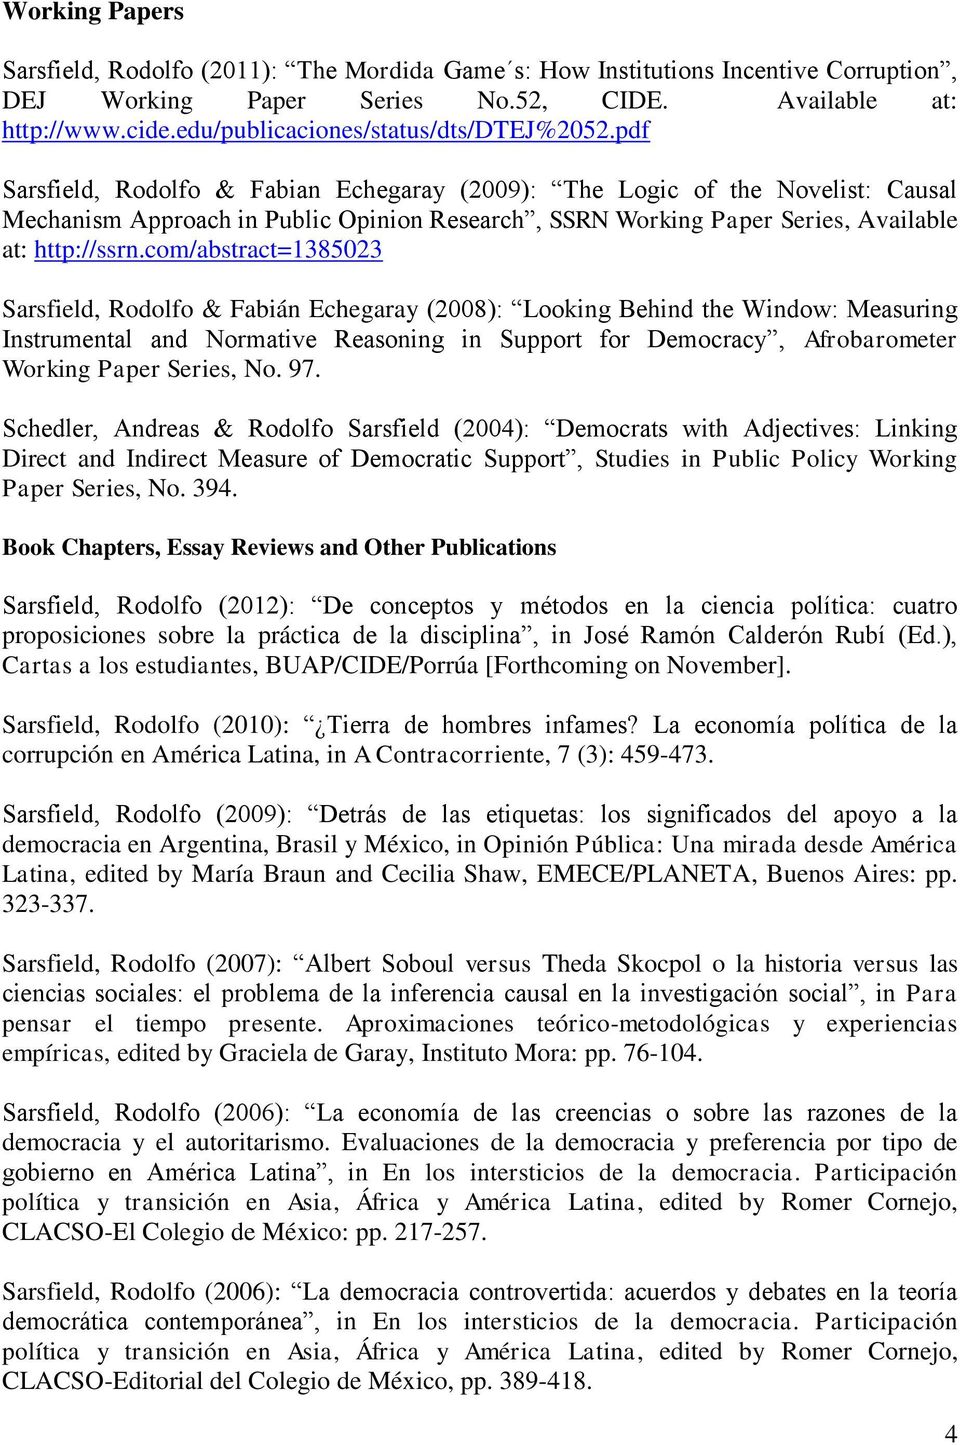 pdf Sarsfield, Rodolfo & Fabian Echegaray (2009): The Logic of the Novelist: Causal Mechanism Approach in Public Opinion Research, SSRN Working Paper Series, Available at: http://ssrn.